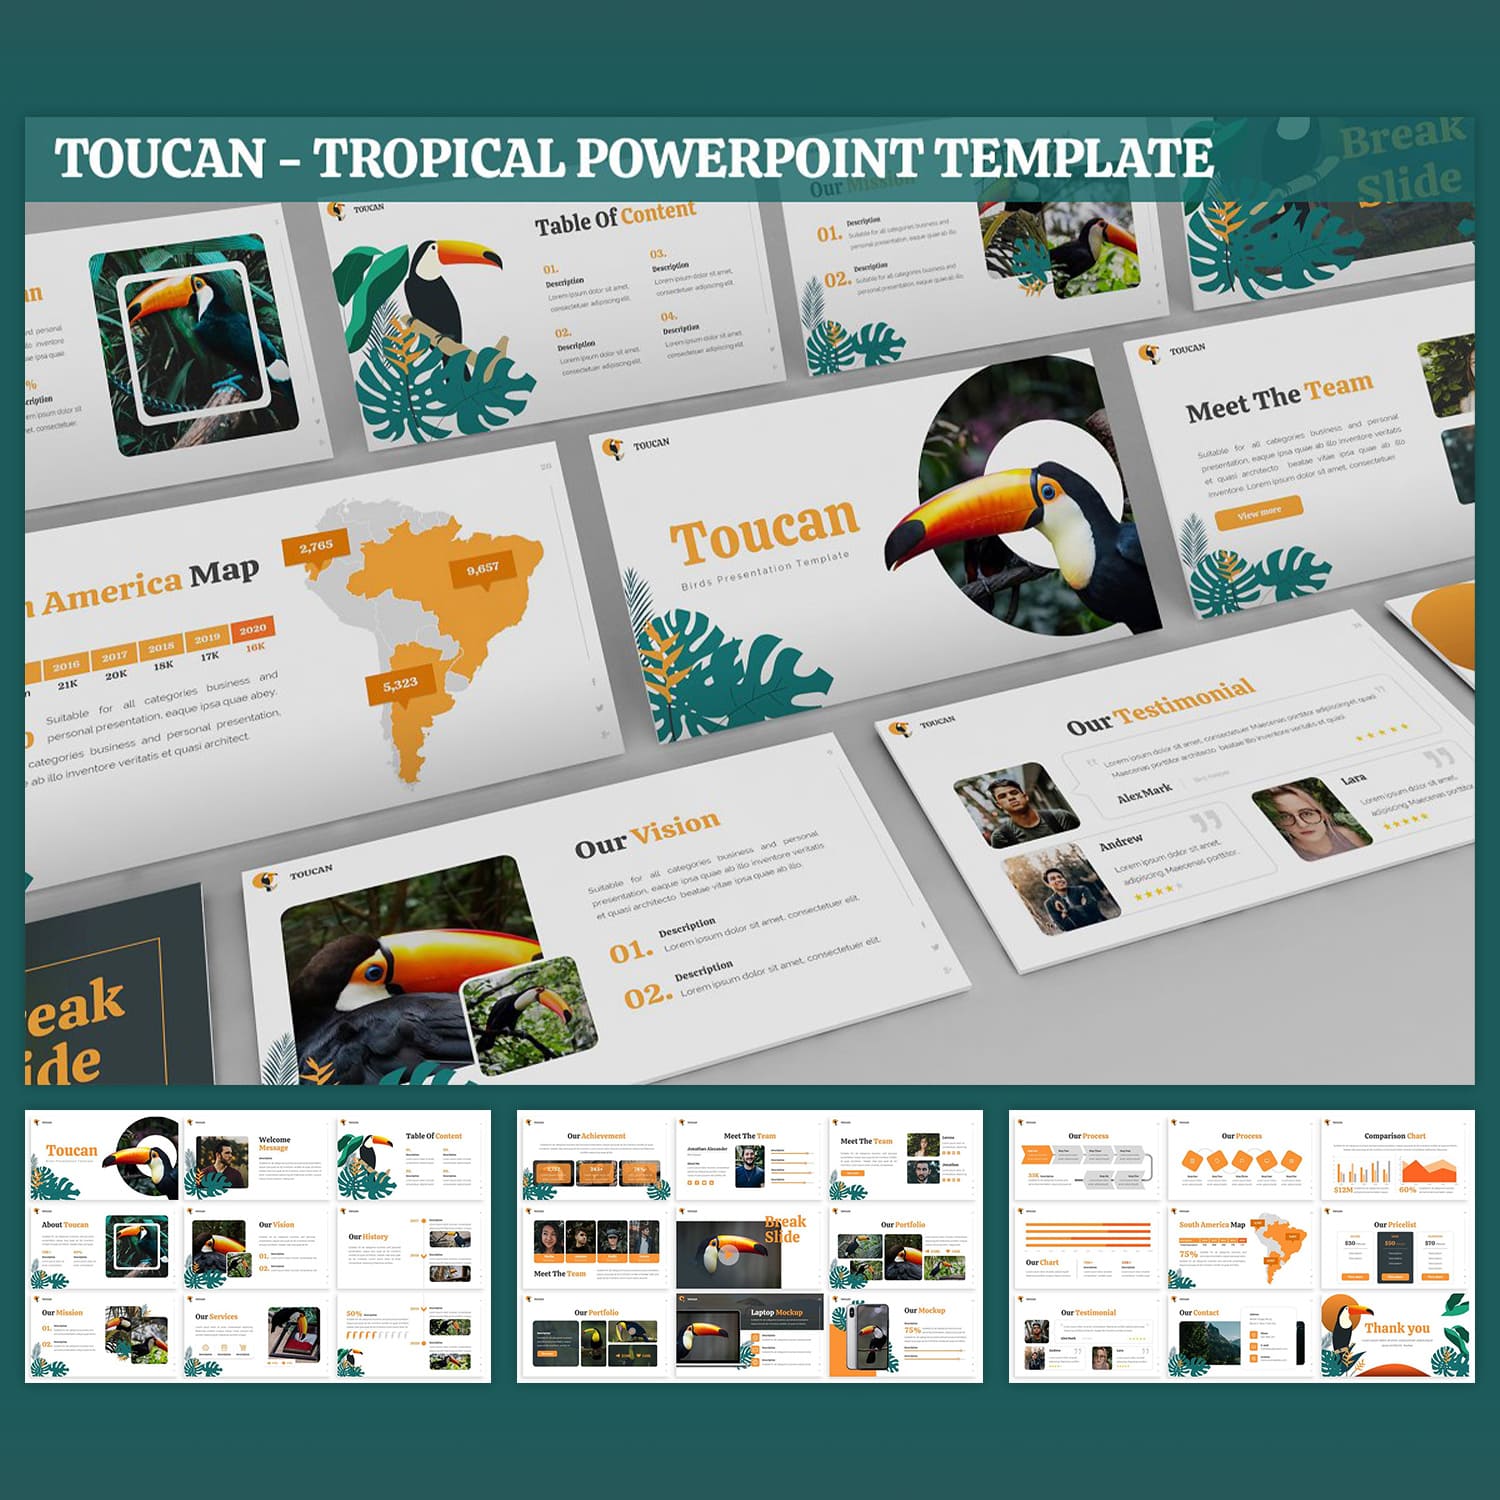 Toucan - Tropical Powerpoint.